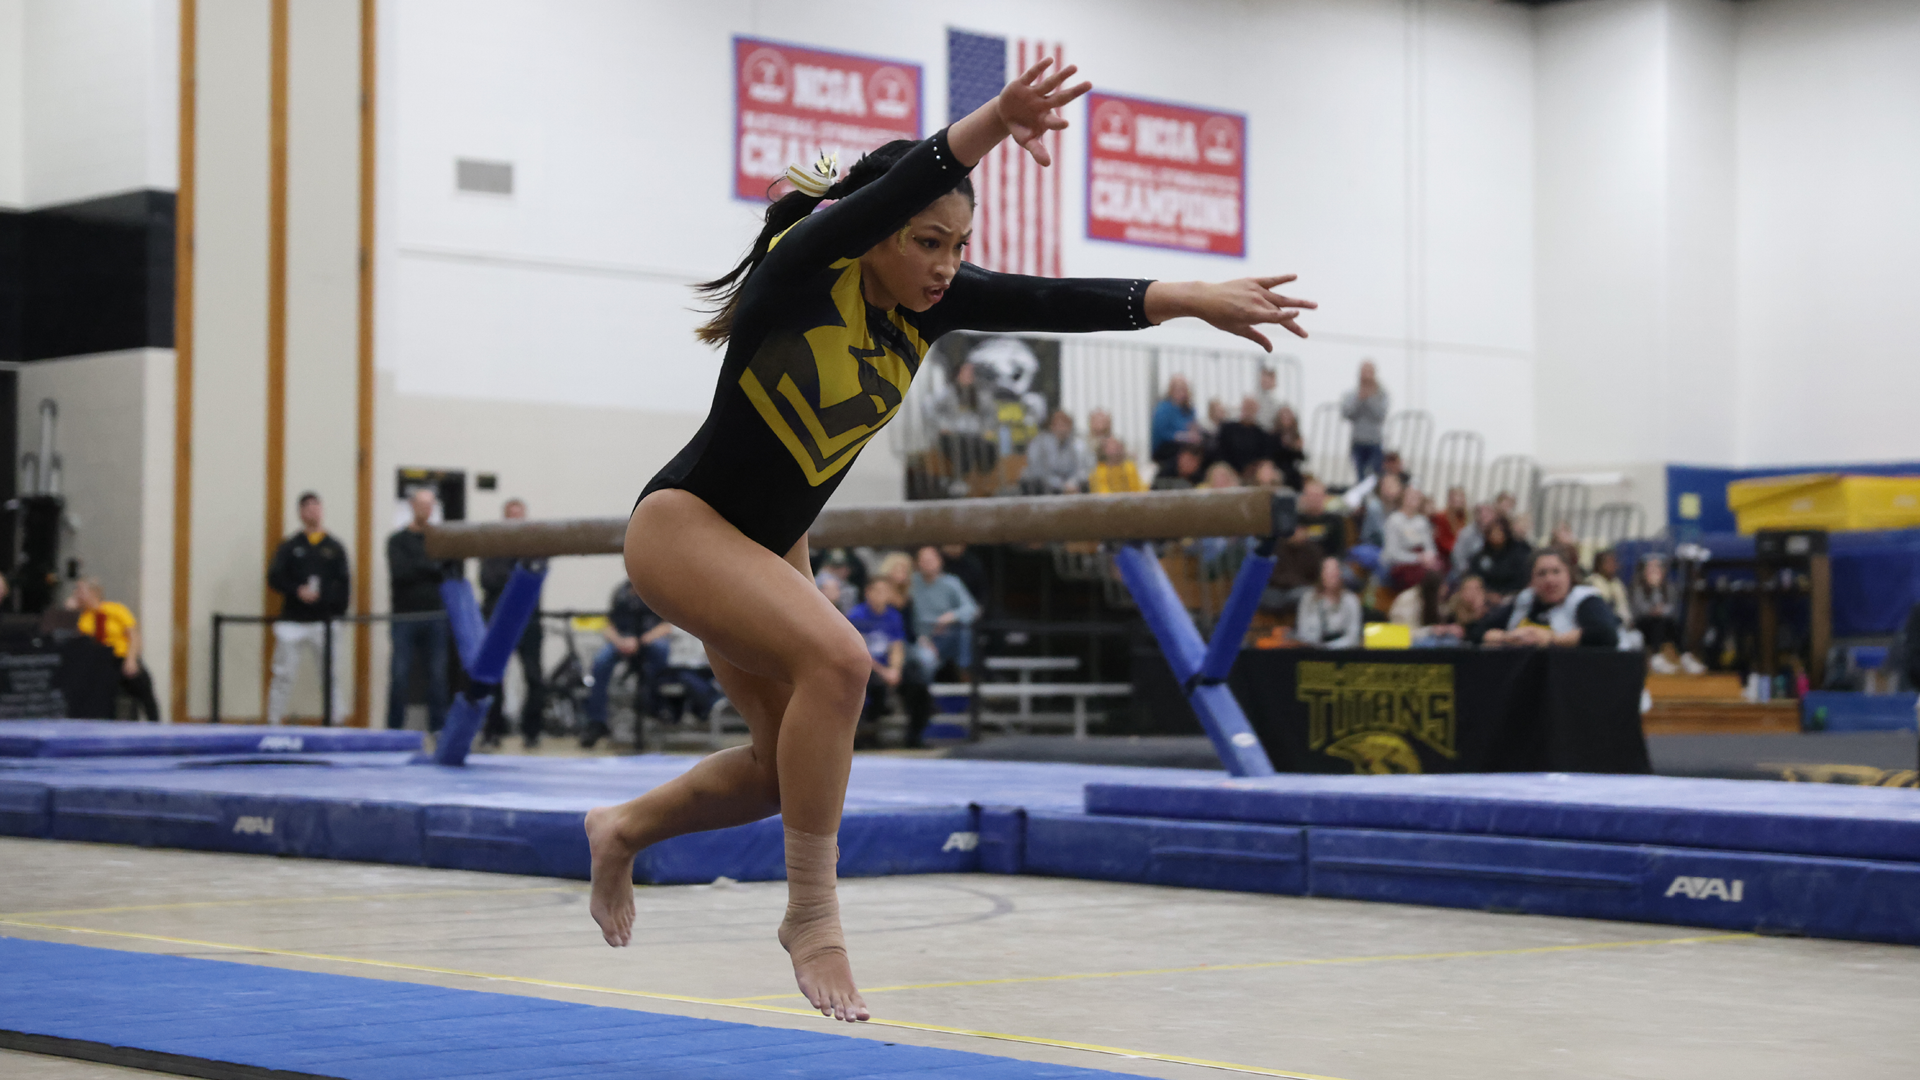 Mia Lucero won the vault at the Bowling Green Triangular on Sunday with a 9.850-point performance.